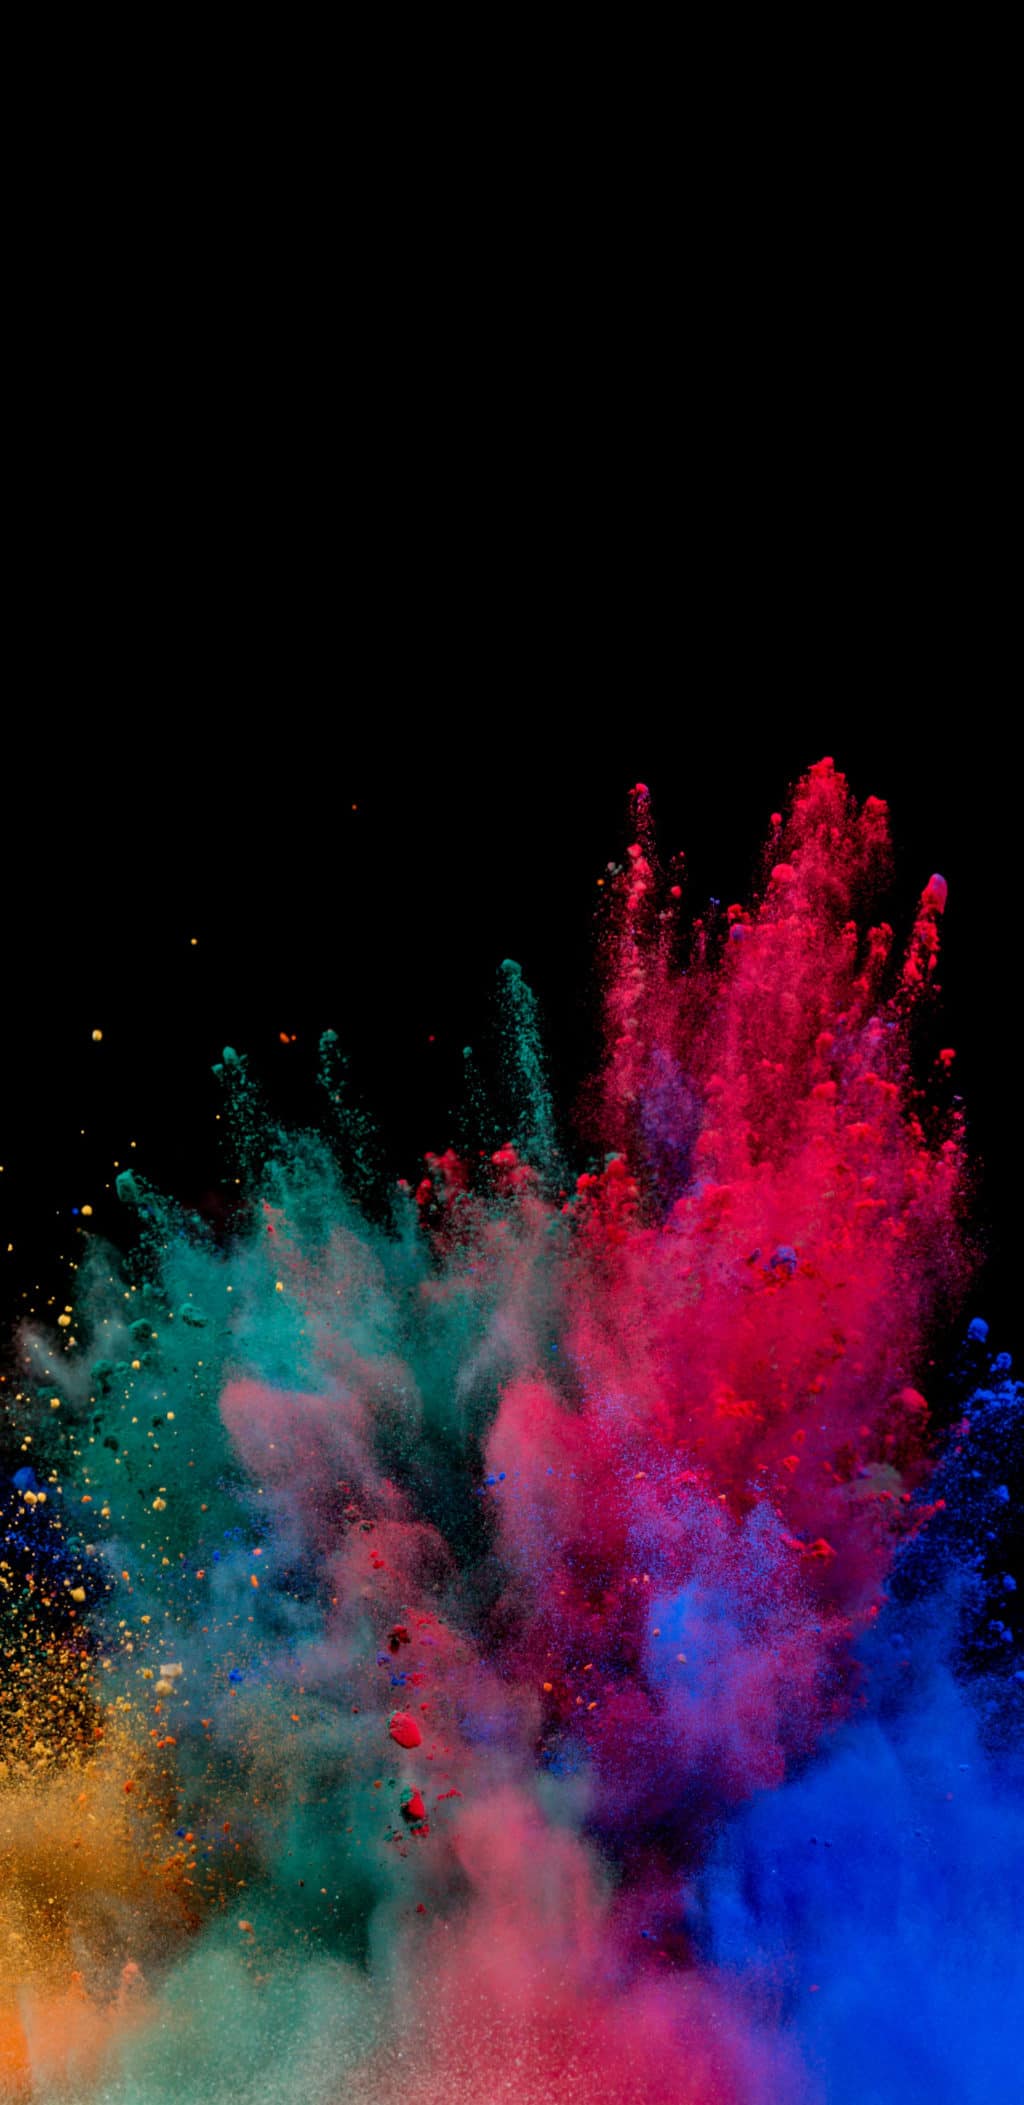 Samsung S9 Plus Wallpapers - Top Free